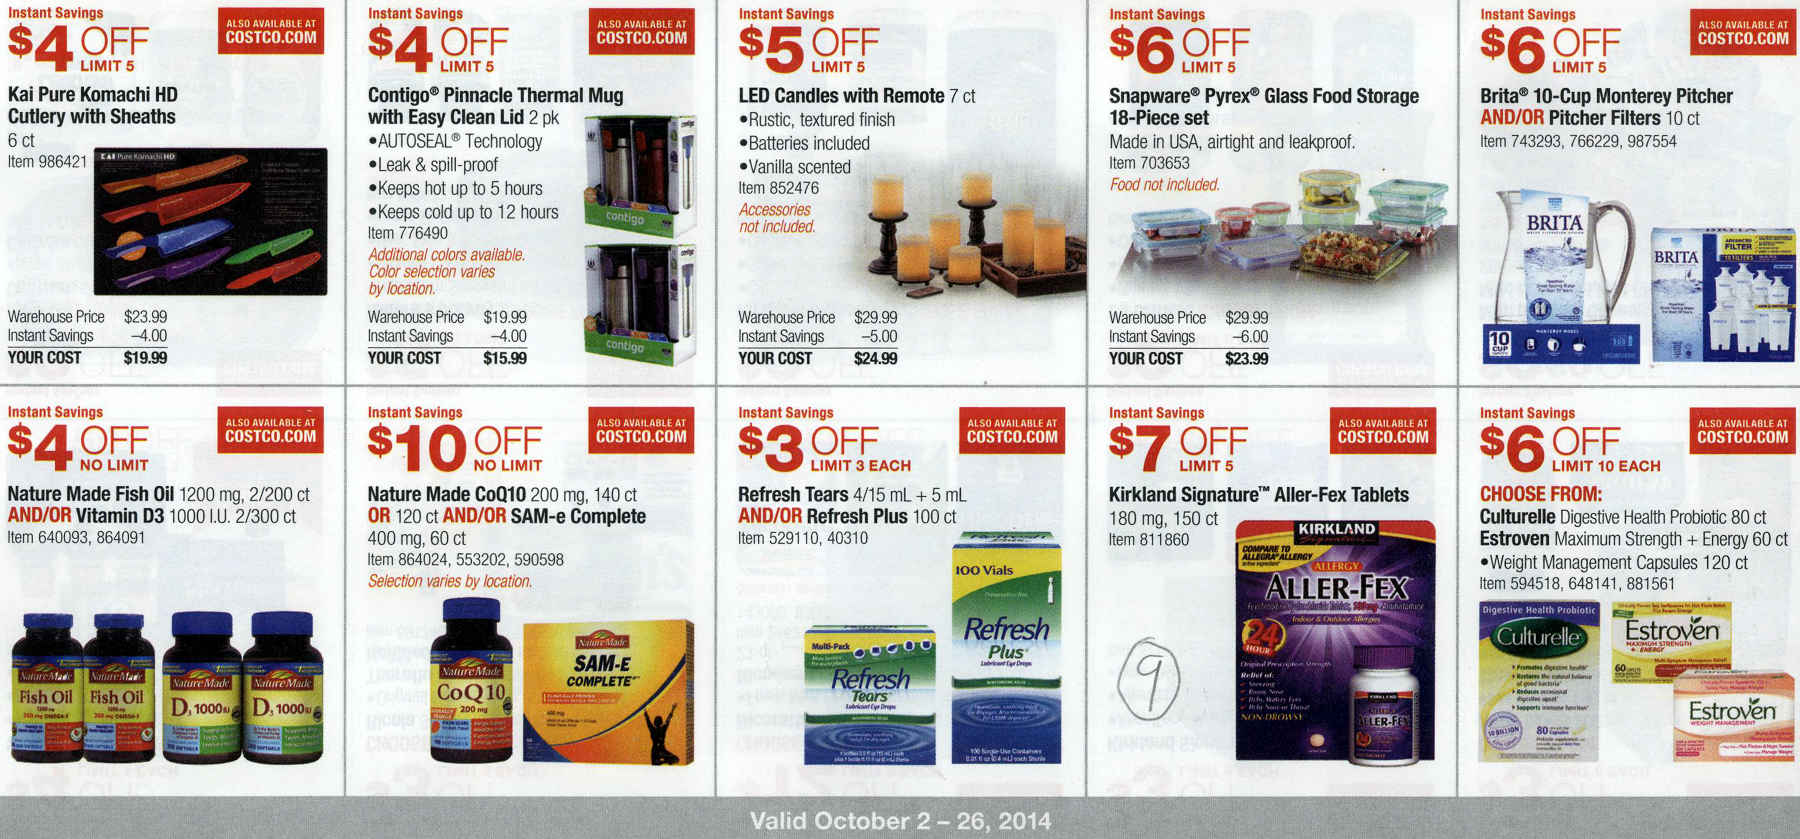 Coupon book full size page -> 9 <-